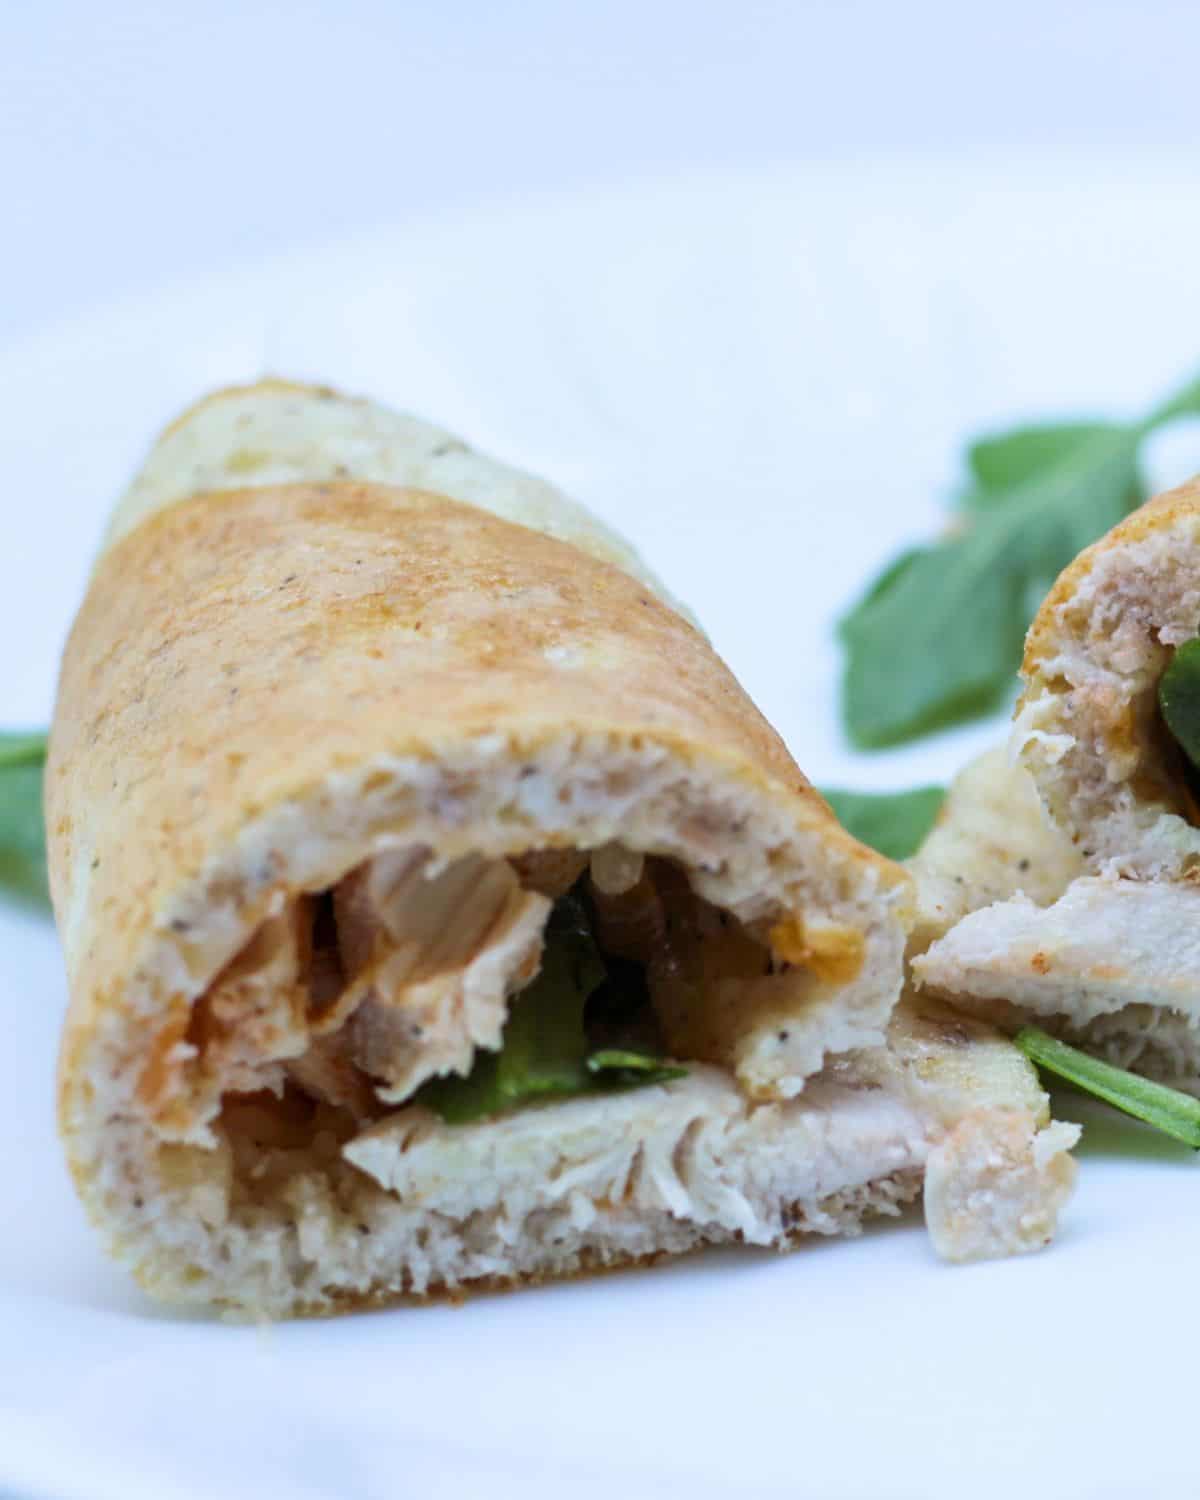 A rolled up chicken in a white wrap.